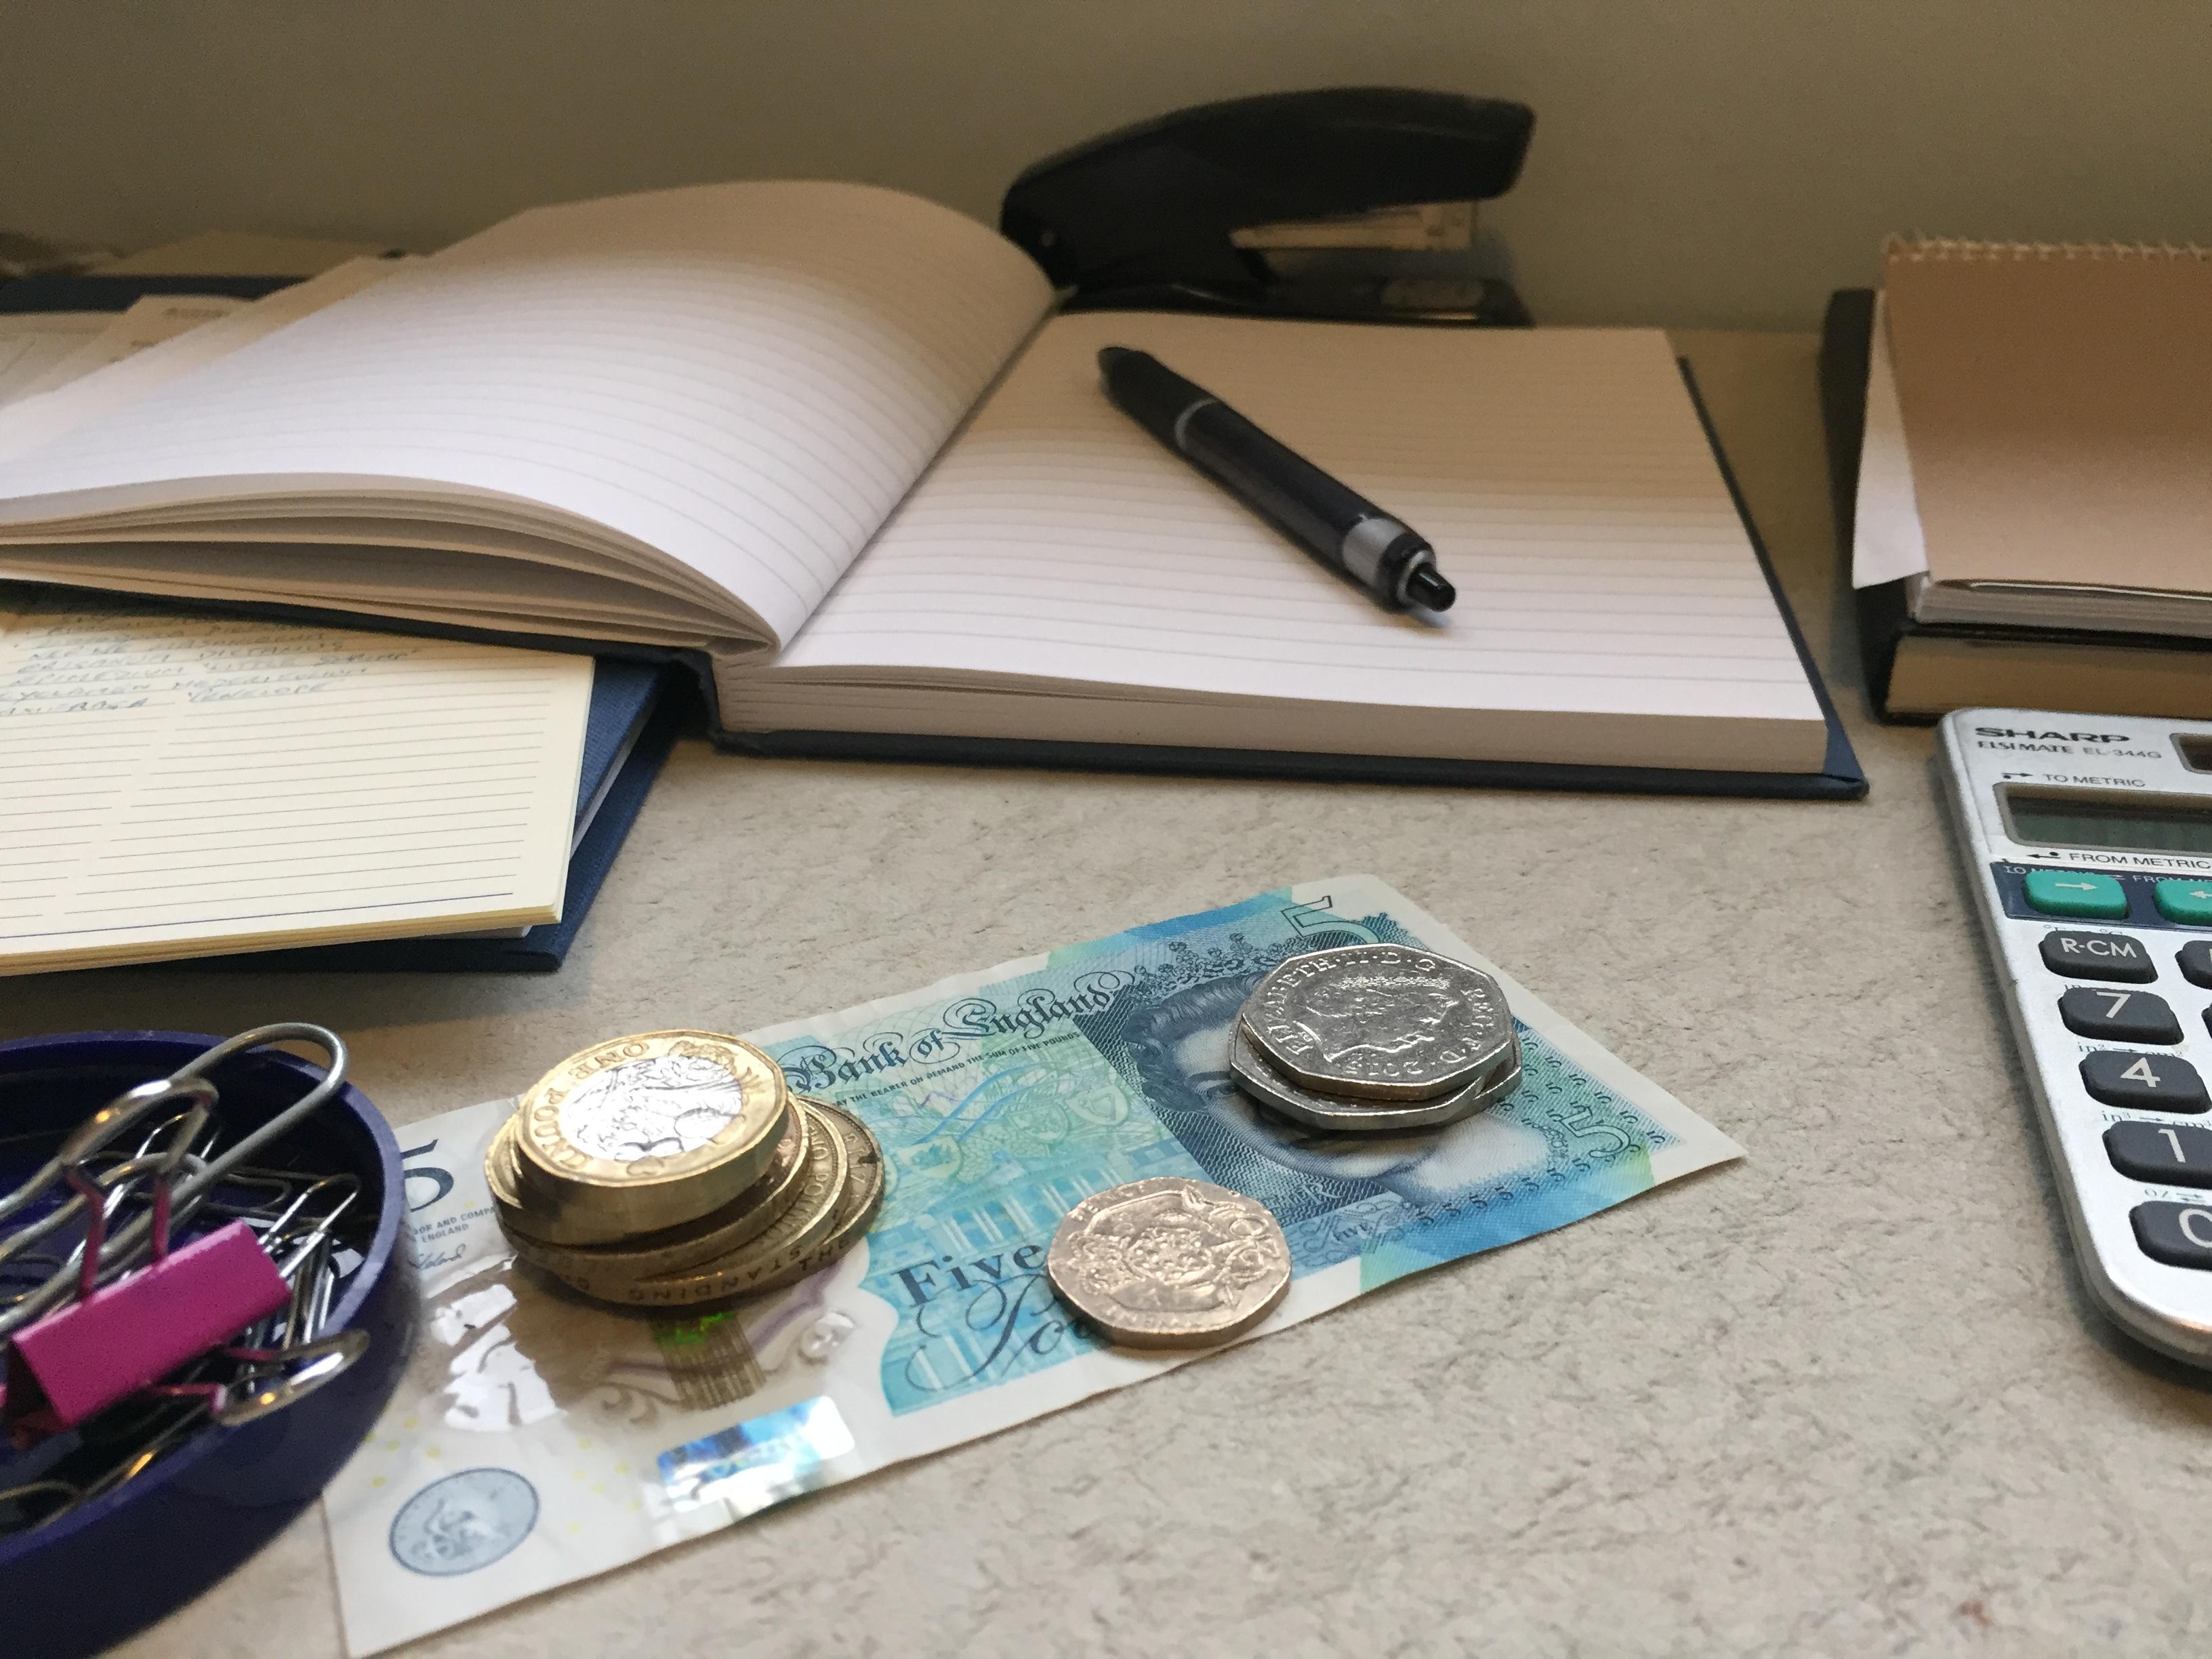 Photo of various objects linked to finance, for example coins, banknotes, books, pen, calculator.